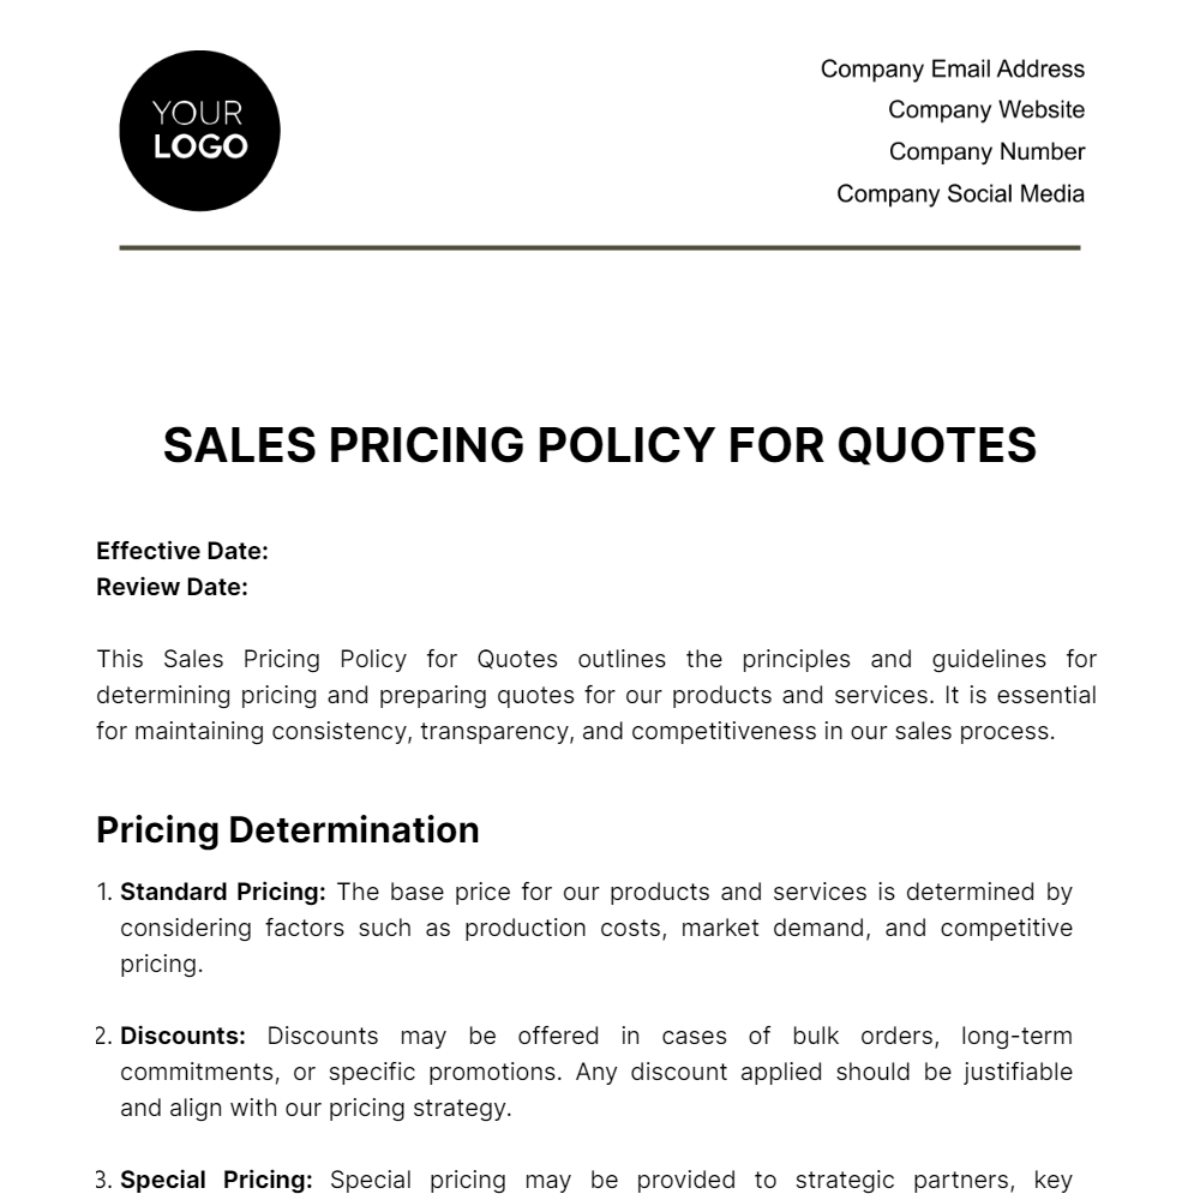 Free Sales Pricing Policy for Quotes Template